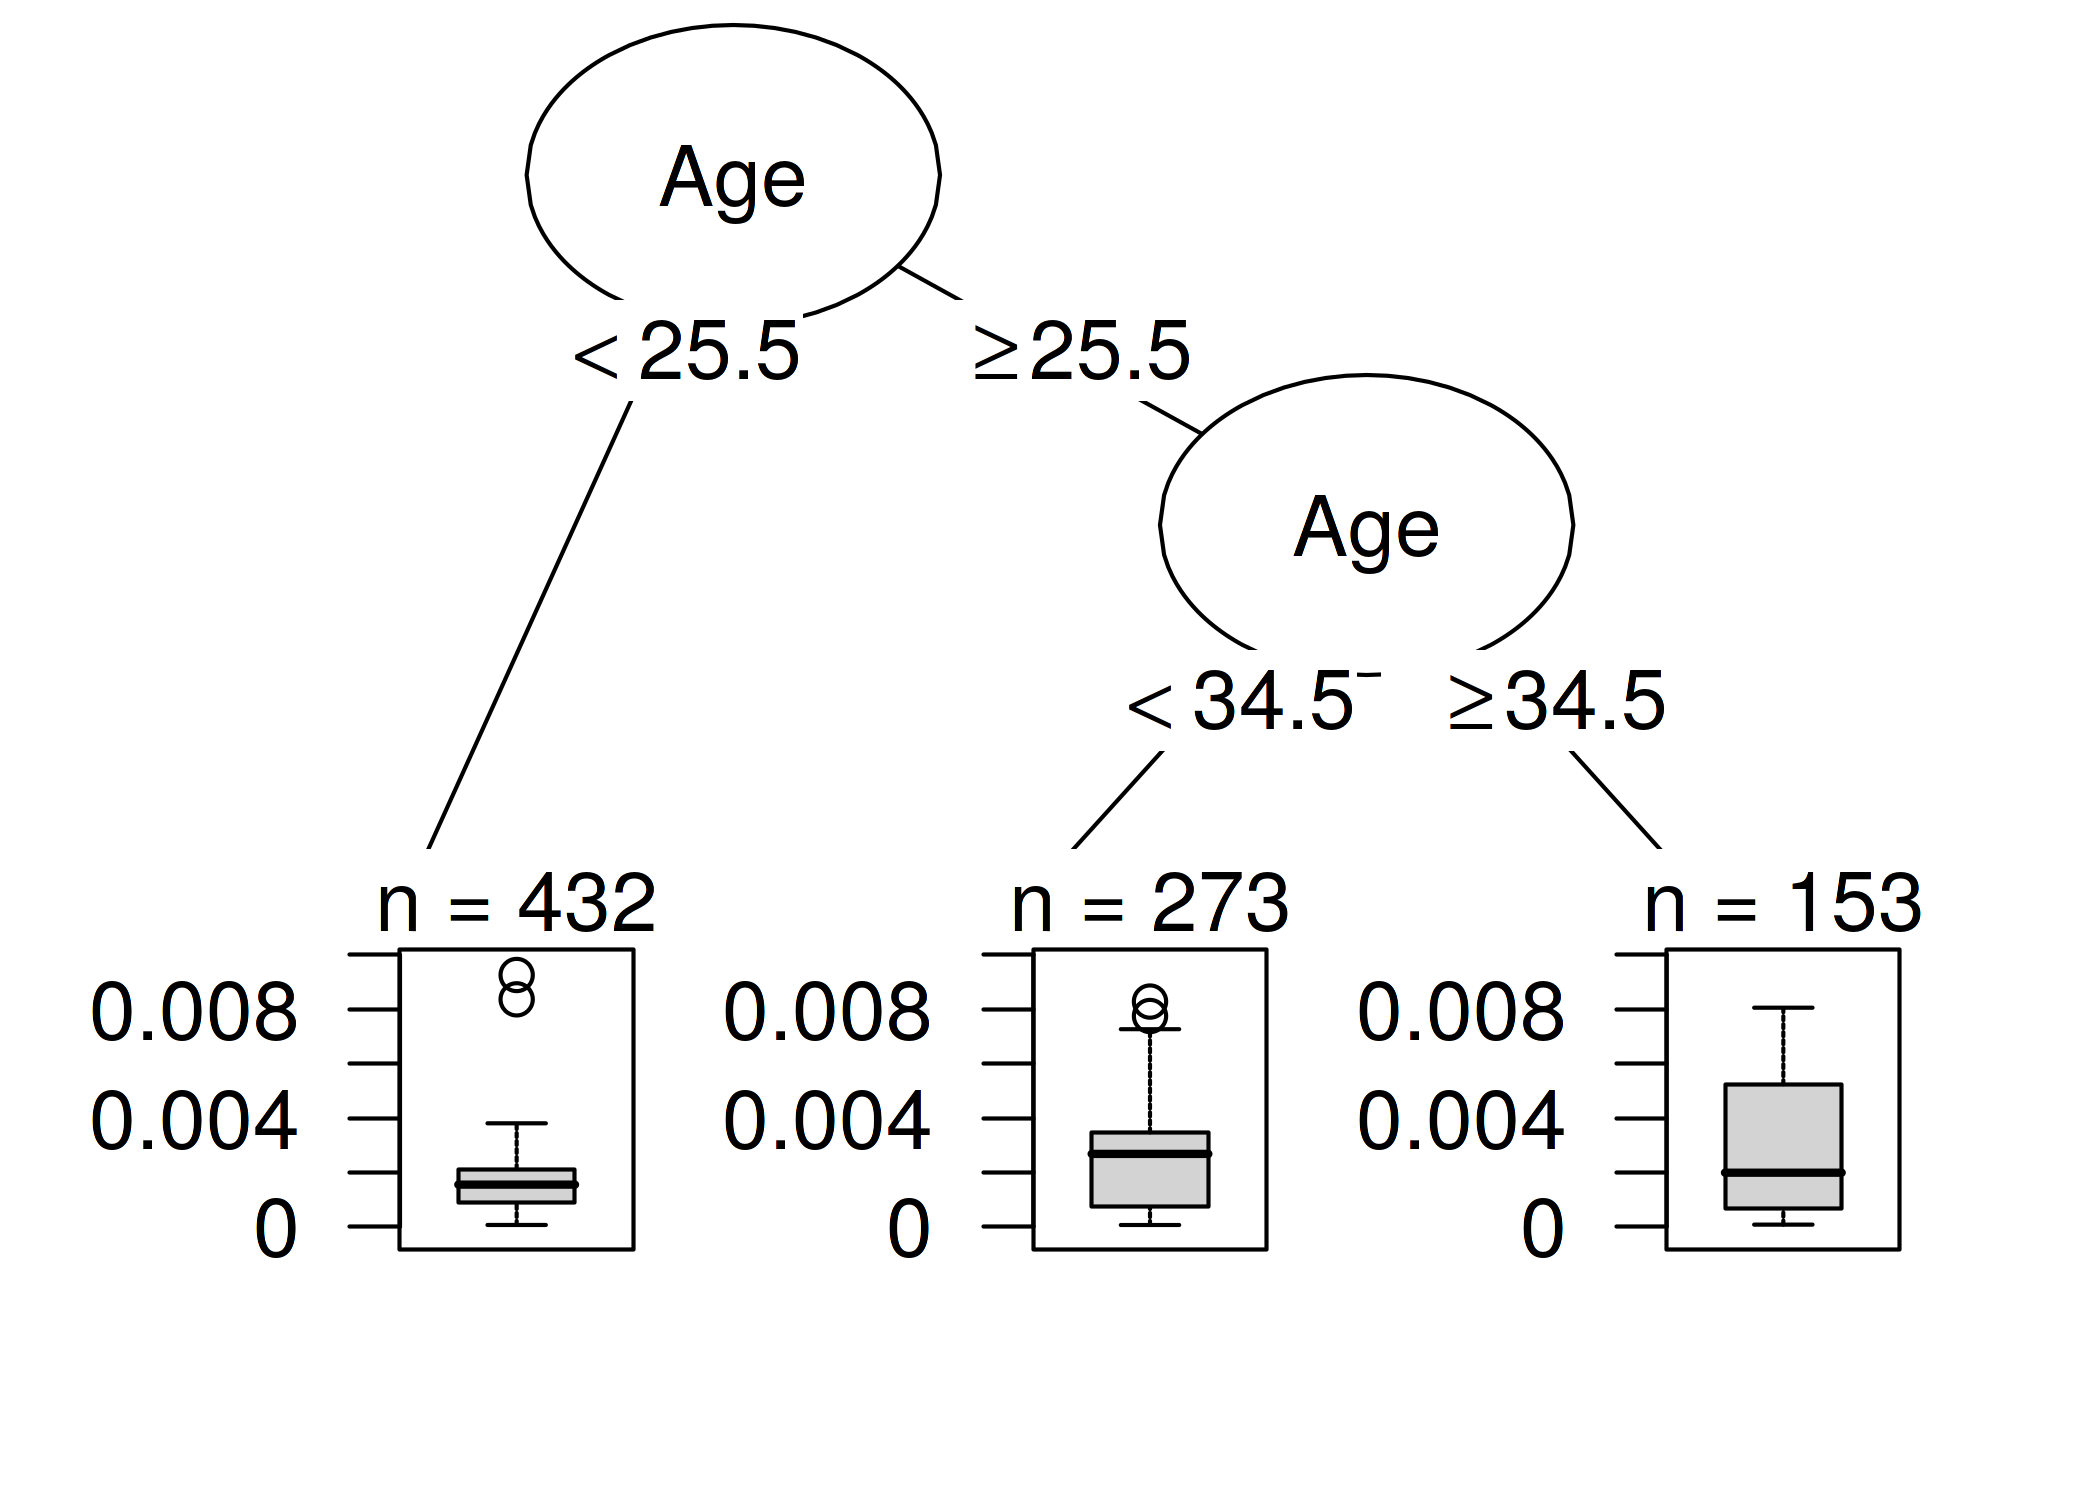 A decision tree that models the relationship between the influence of the instances and their features. The maximum depth of the tree is set to 2.